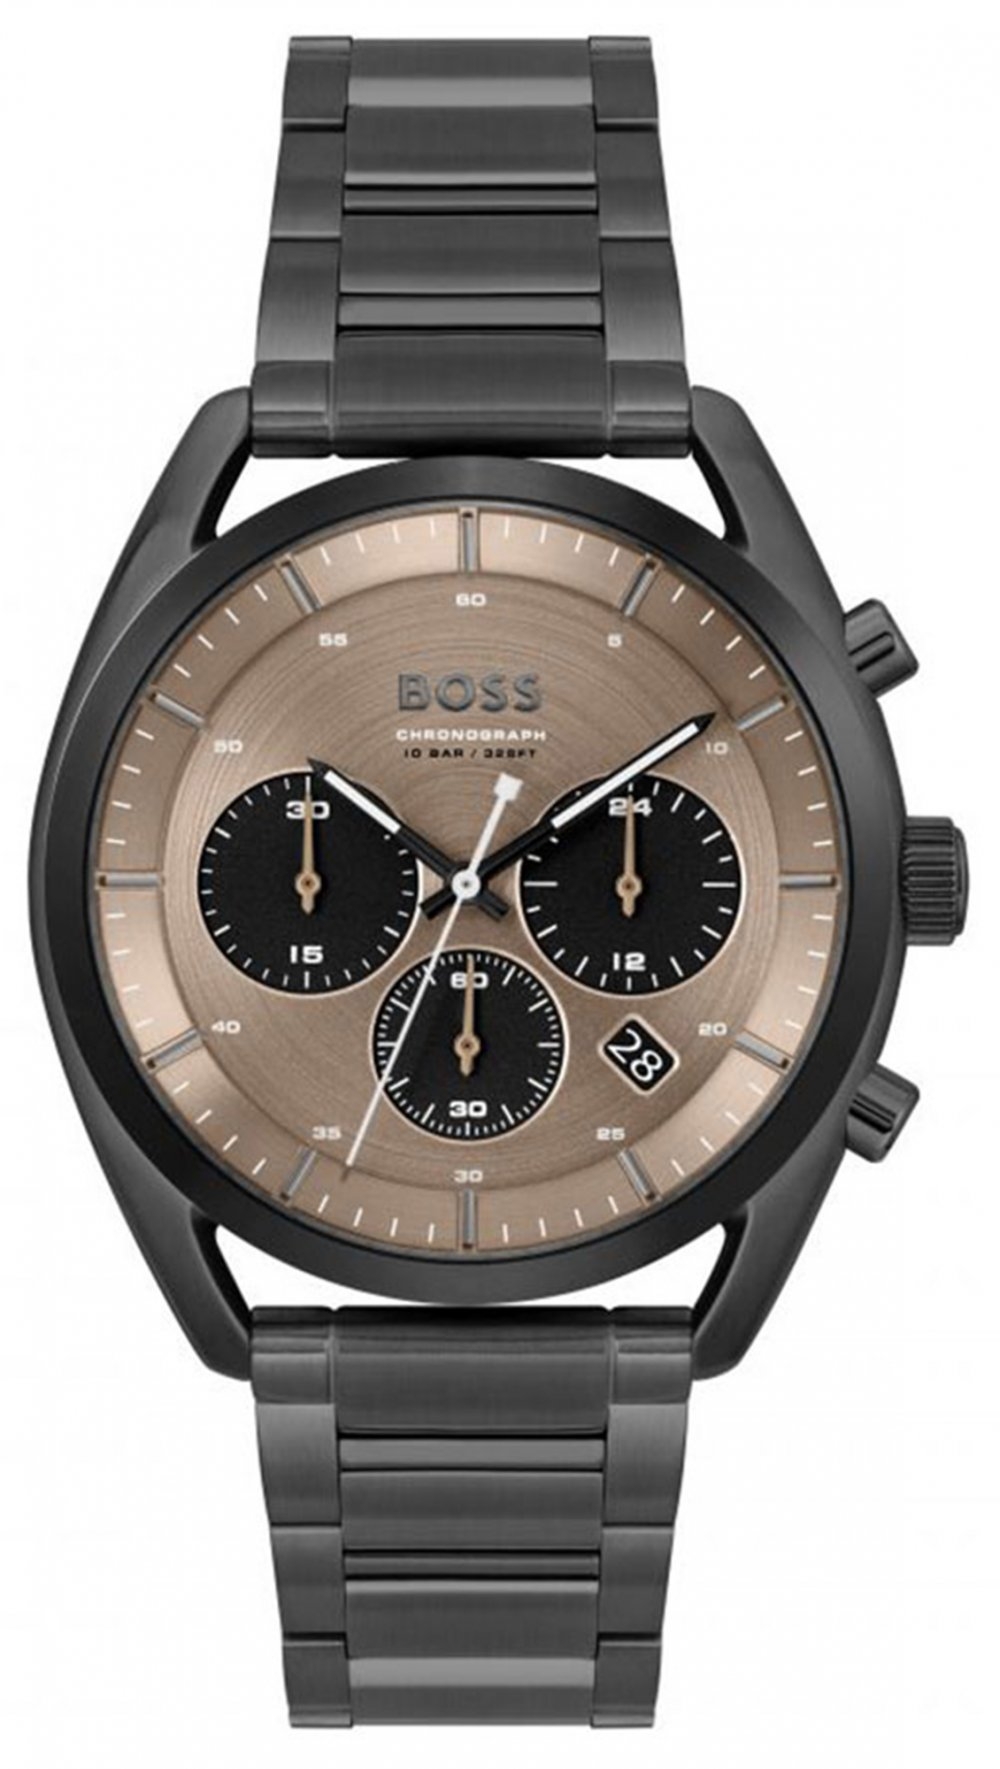 boss top chronograph 1514095 black case with stainless steel bracelet image1